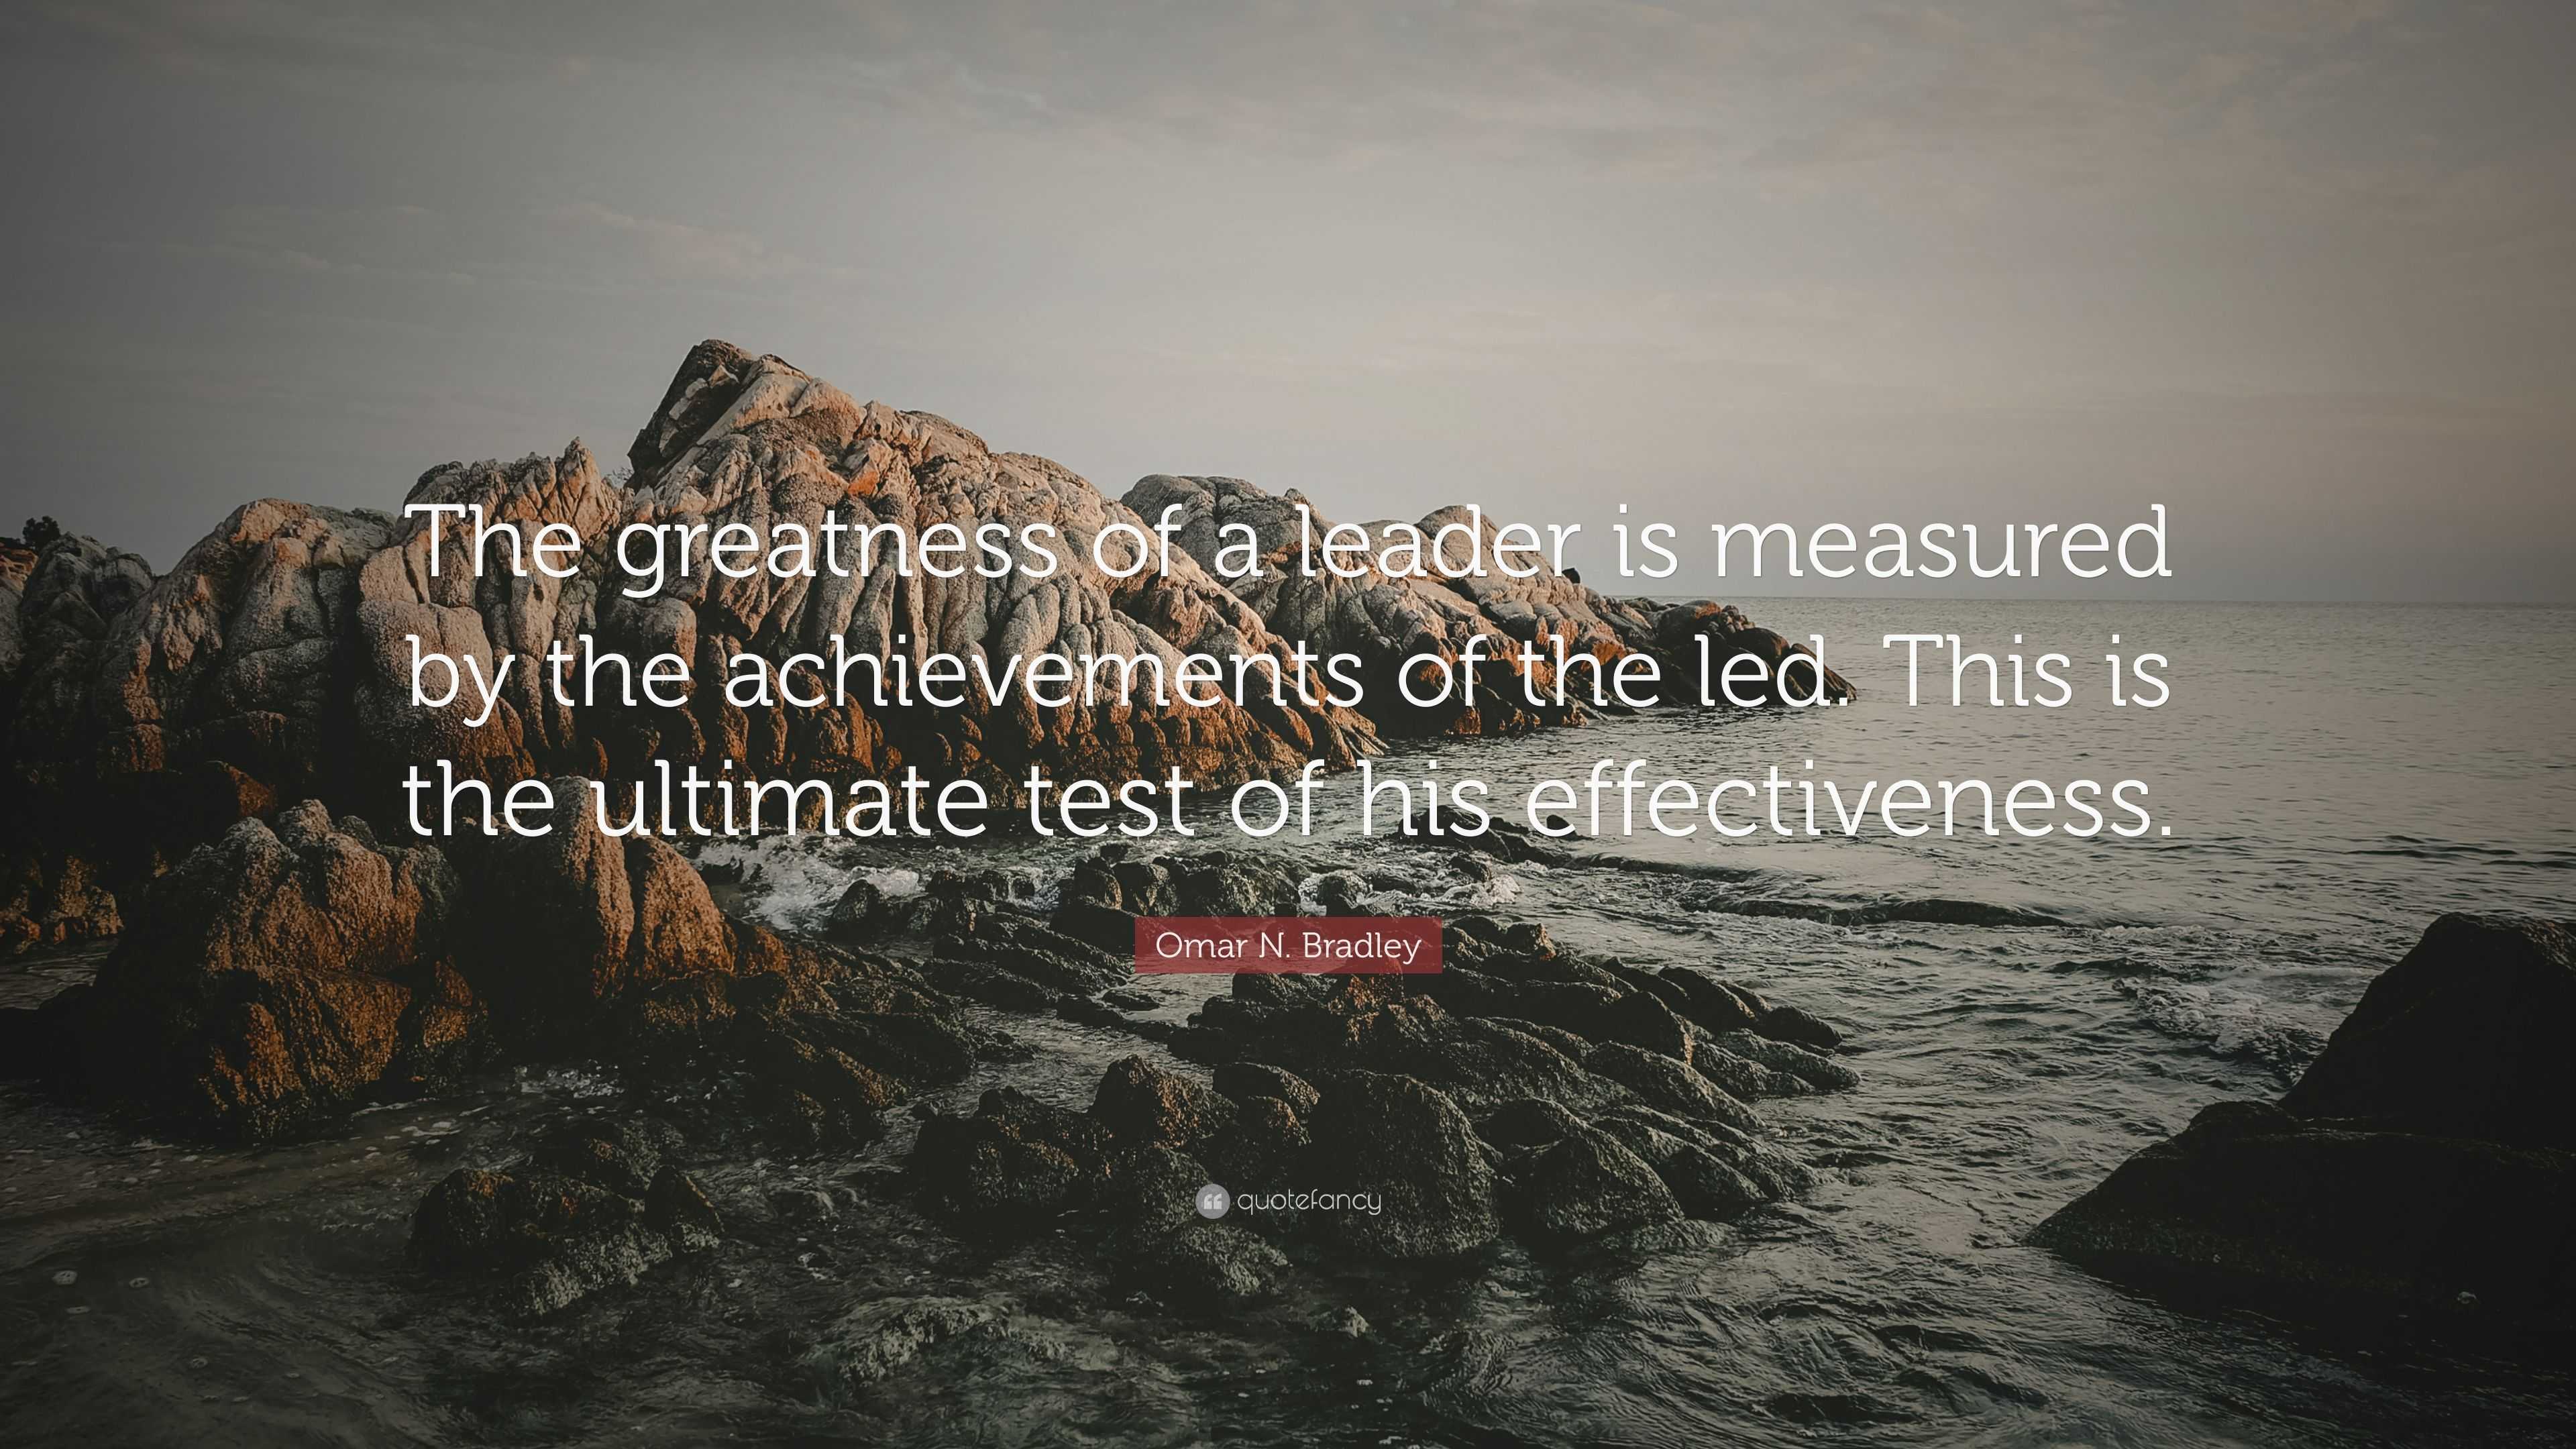 Omar N. Bradley Quote: “The greatness of a leader is measured by the